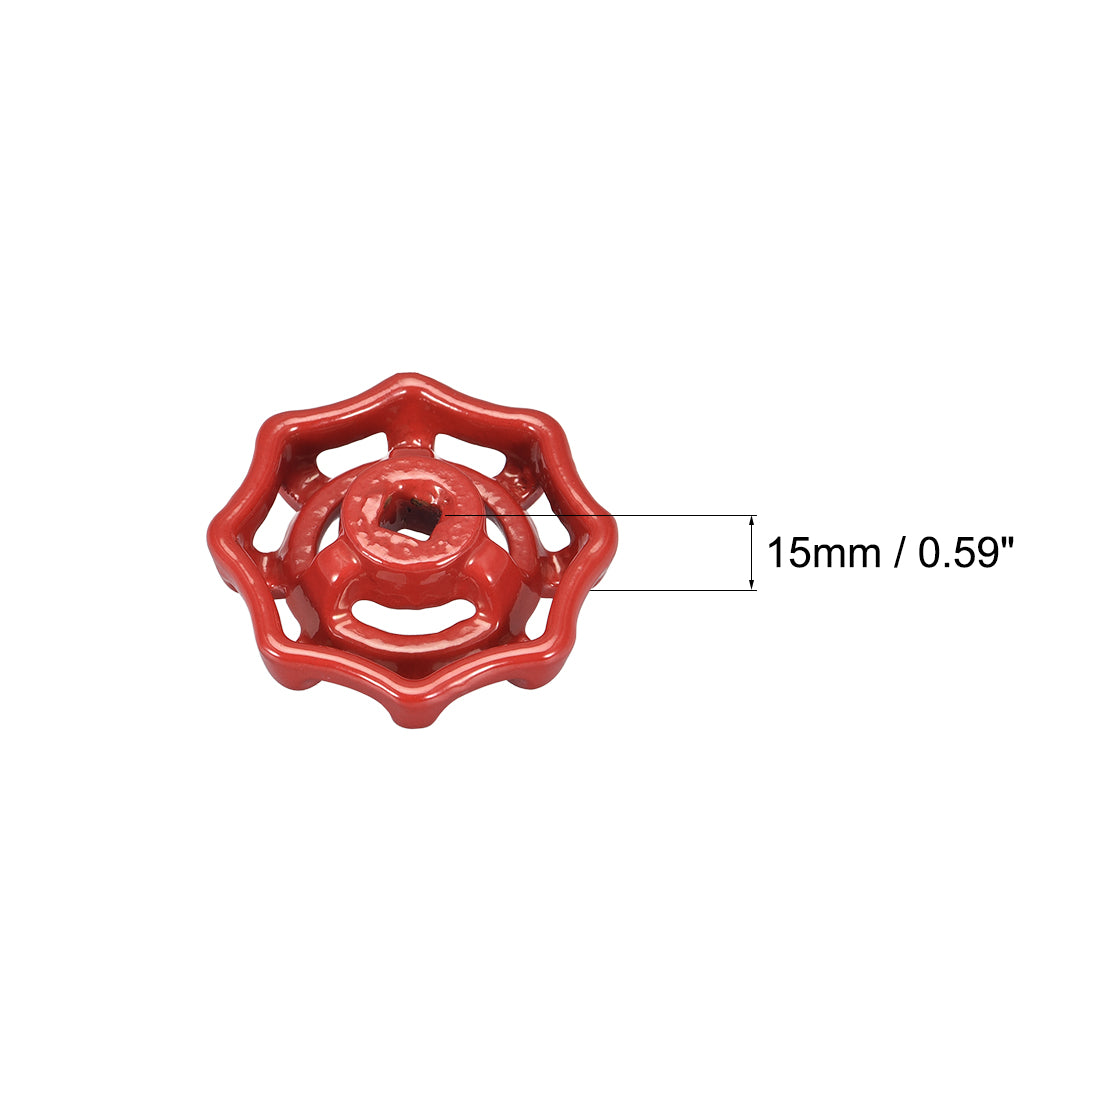 Uxcell Uxcell Round Wheel Handle, Square Broach 6x6mm, Wheel OD 51mm Paint Cast Steel Red 6Pcs